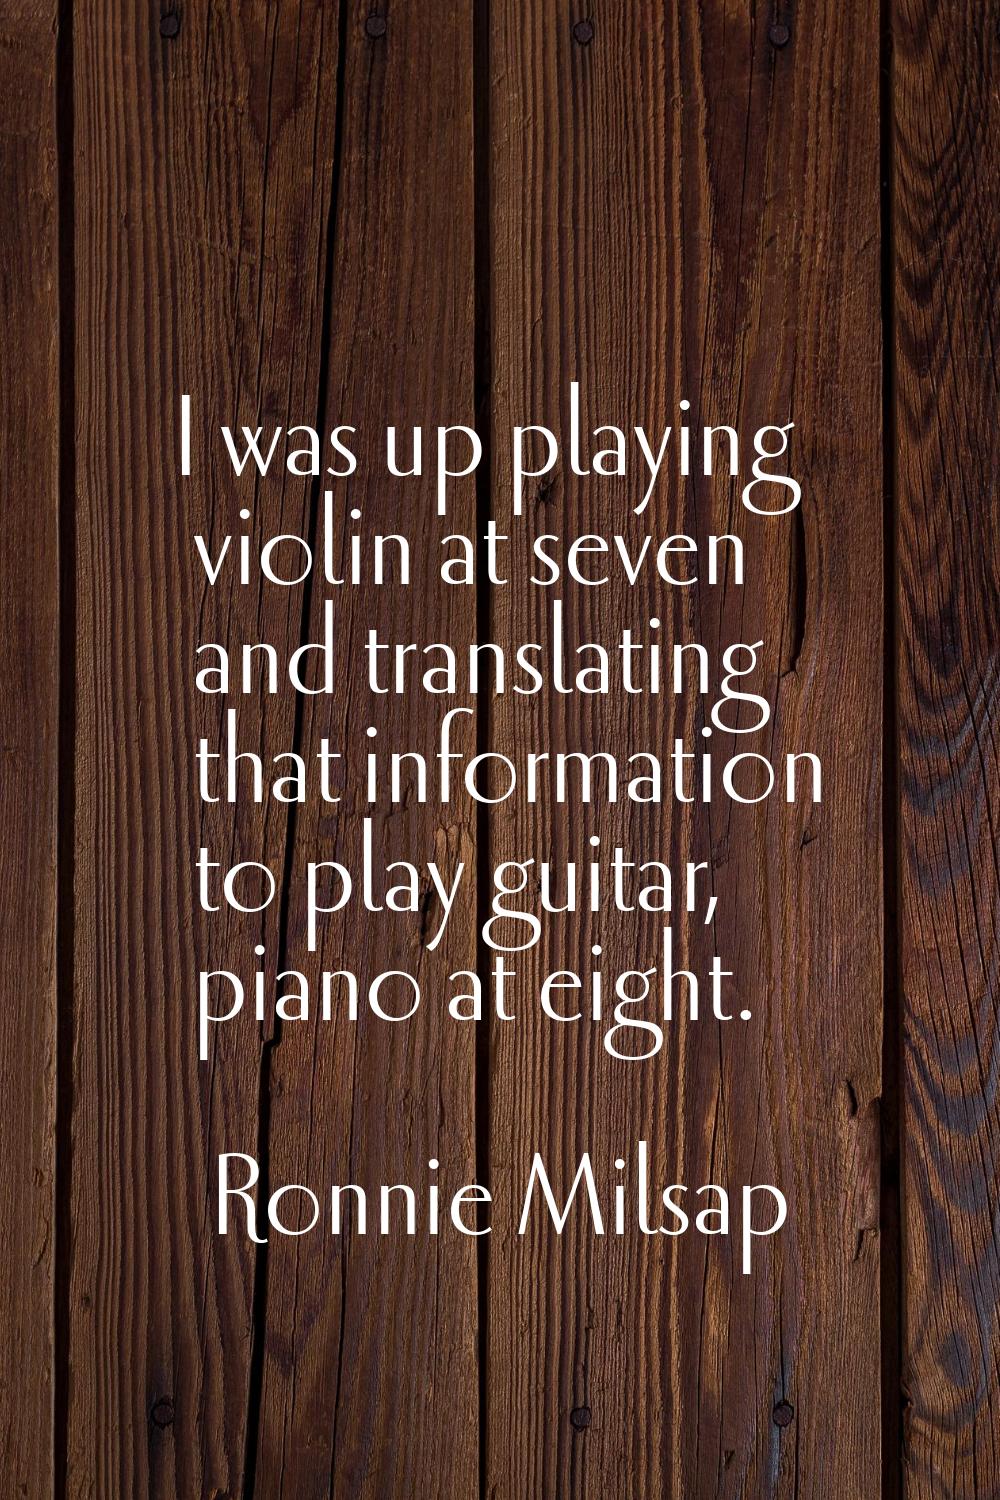 I was up playing violin at seven and translating that information to play guitar, piano at eight.